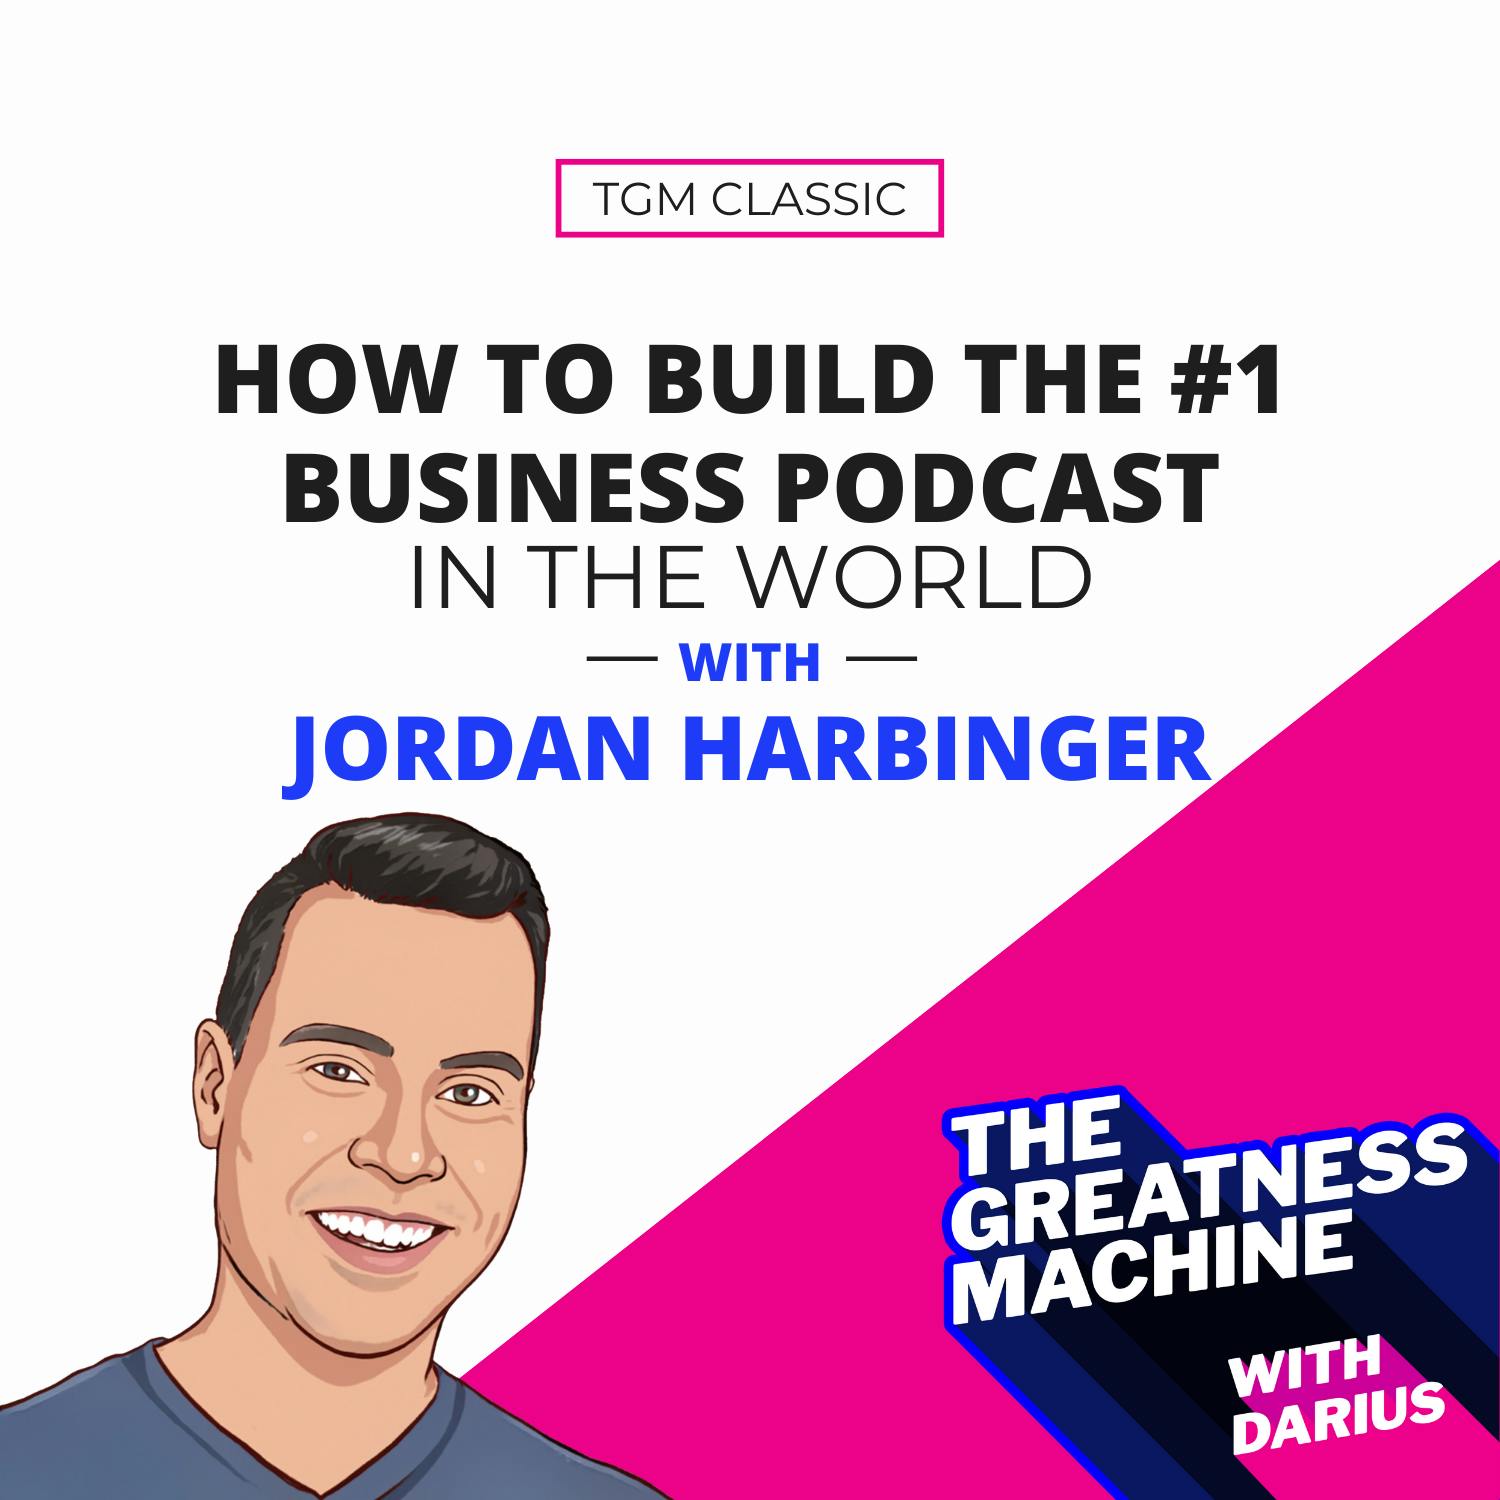 TGM Classic | Jordan Harbinger | How To Build The #1 Business Podcast In The World